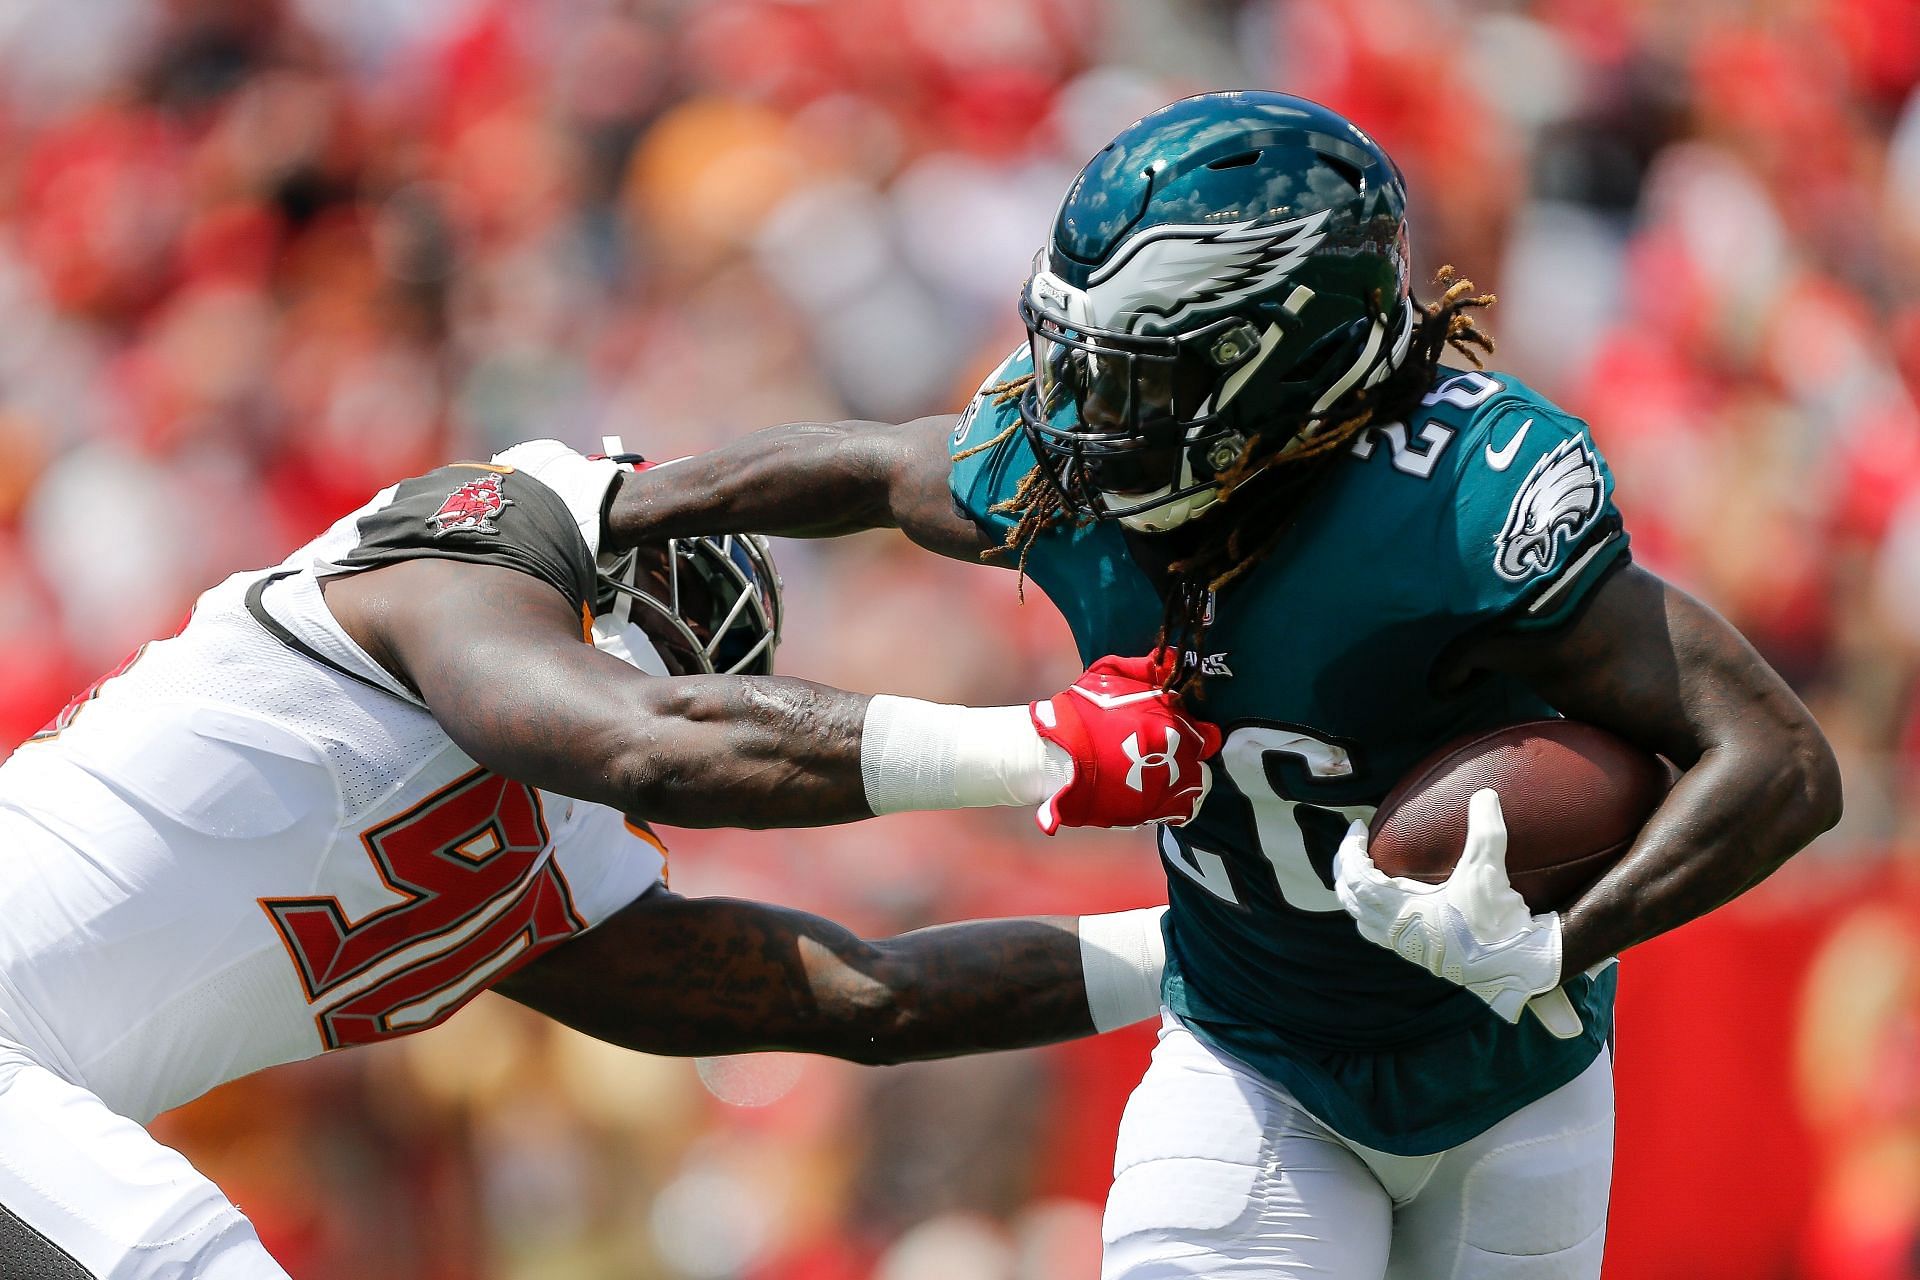 Philadelphia Eagles face the Tampa Bay Buccaneers on Thursday night